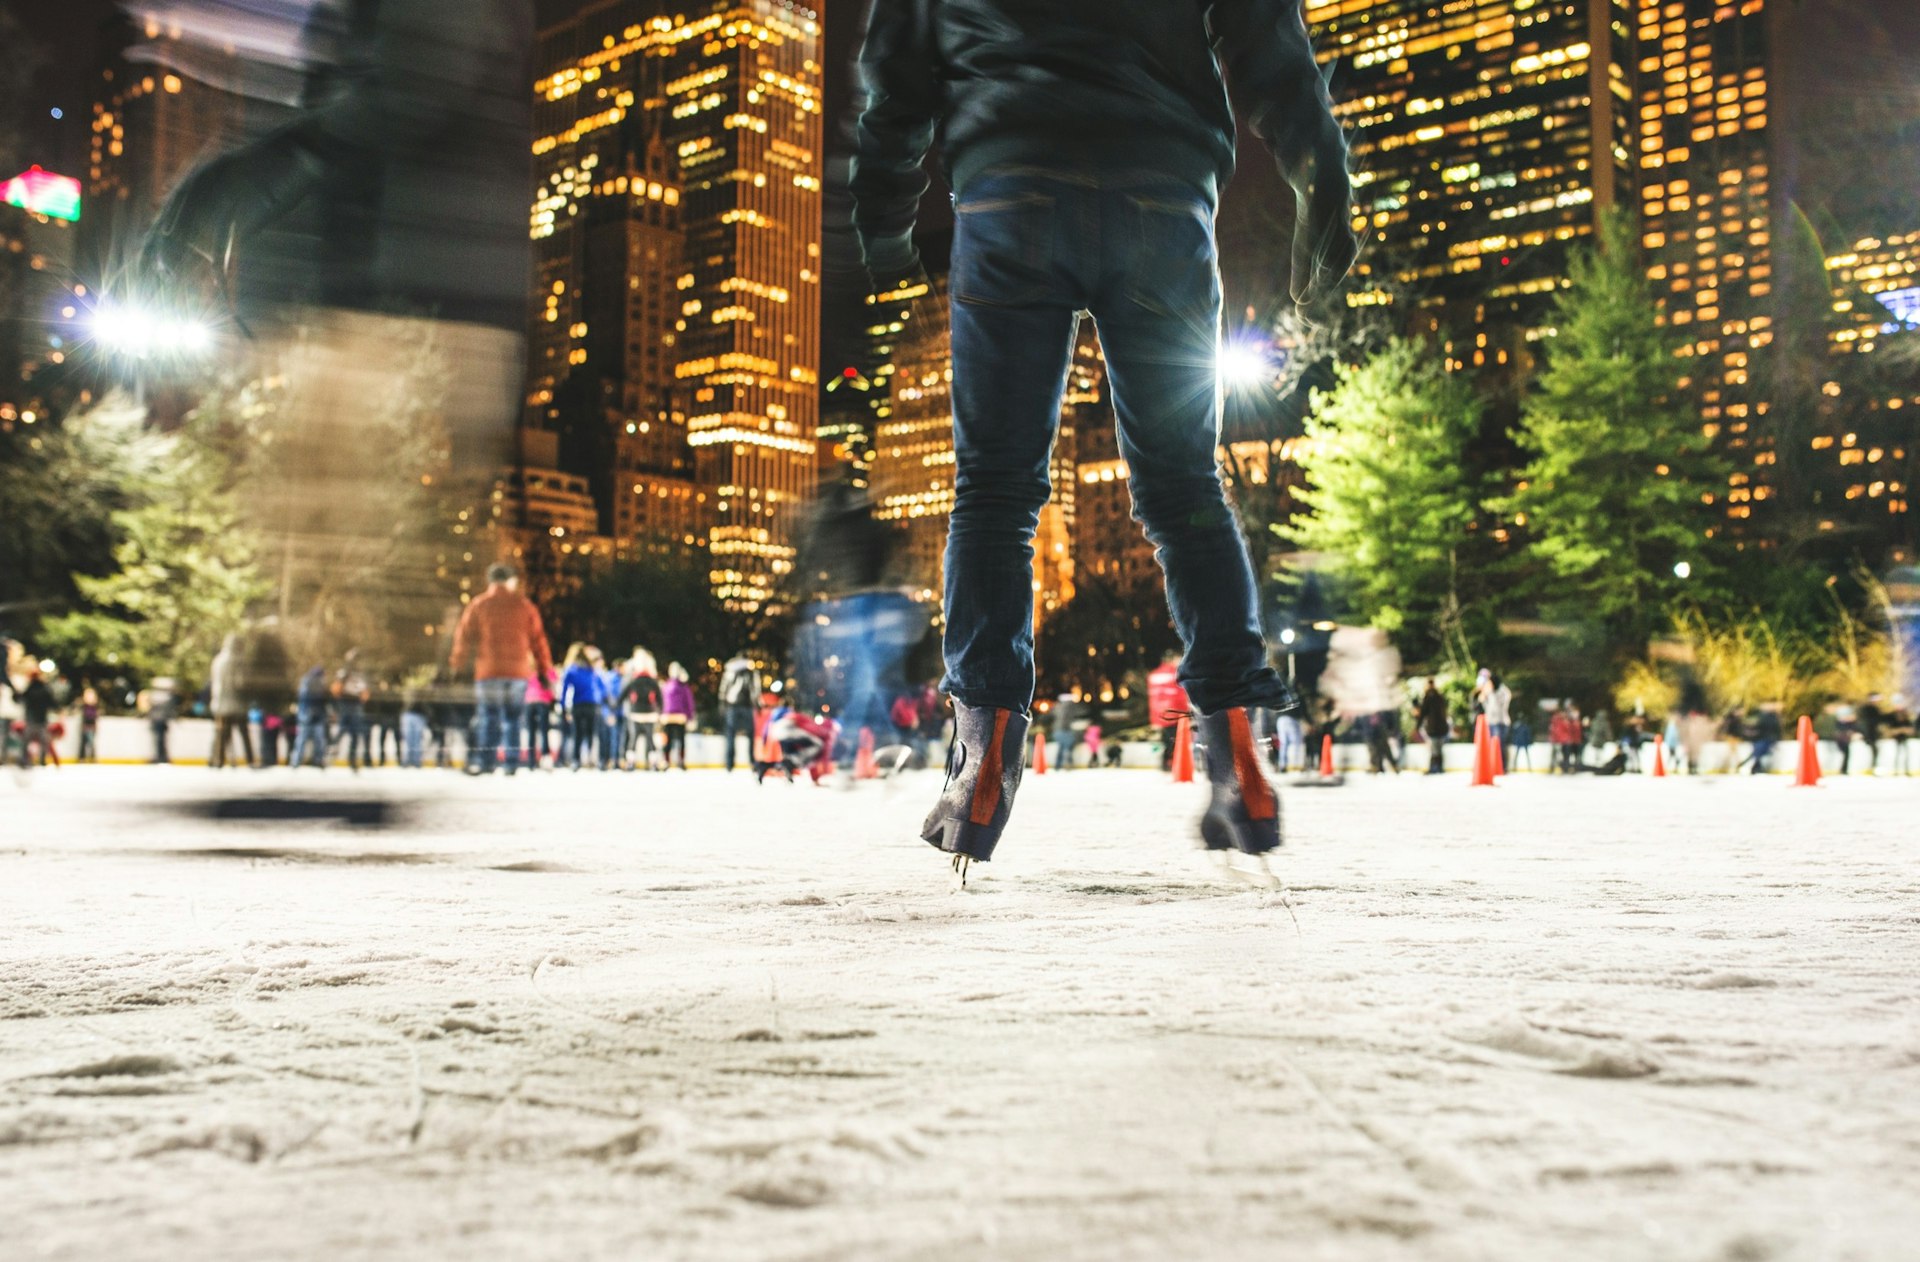 A person wearing skates is the focal point of the frame. In the background there are other people skating at Central Park in night. You can also see tall green trees to the right. 